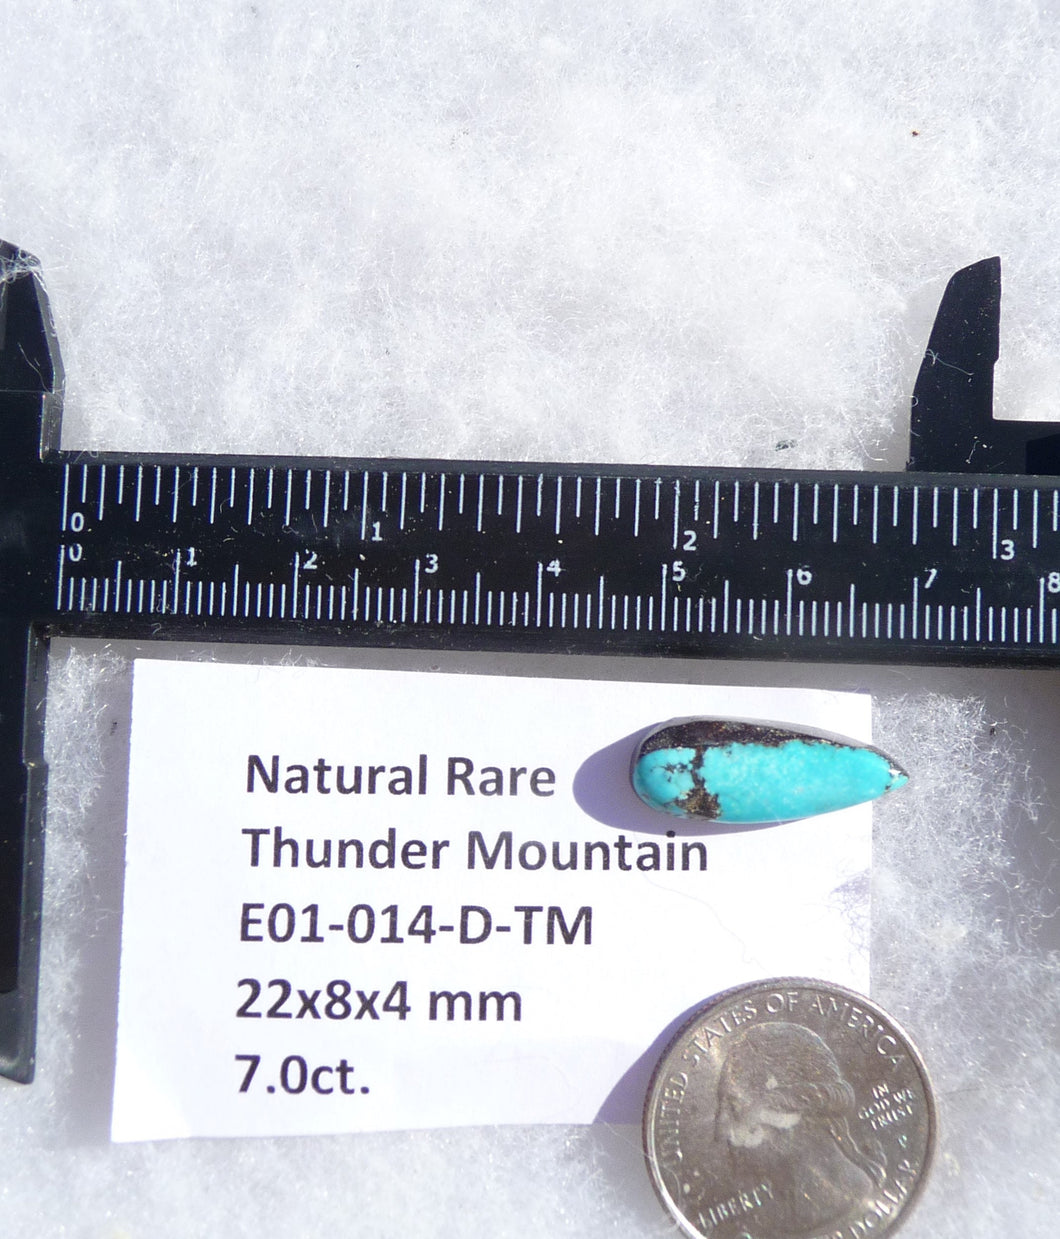 7.0 ct. Natural Rare Thunder Mountain Turquoise (Backed) 22x8x4 mm Cabochon, Gemstone E01-014-D-TM